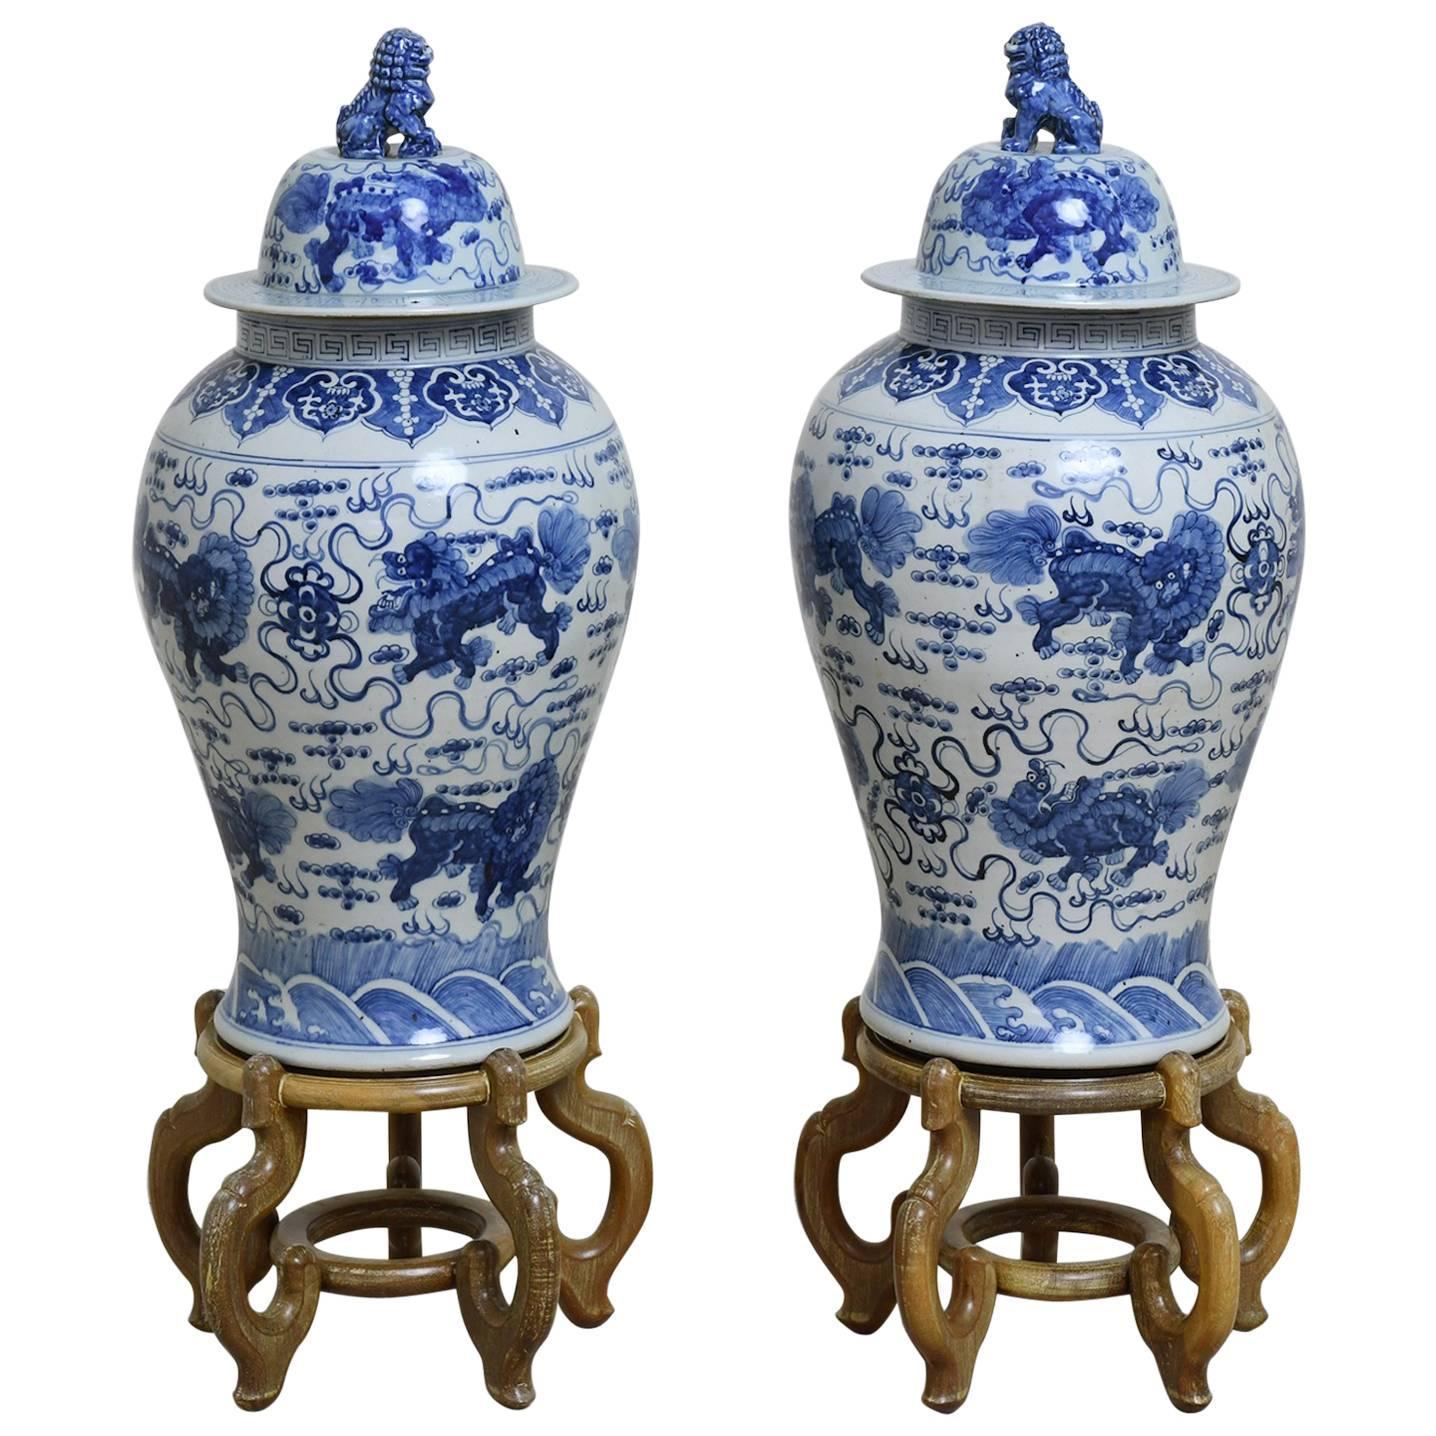 Pair of 20th Century Chinese Blue and White Porcelain Urns with Lids on Stands For Sale at 1stdibs